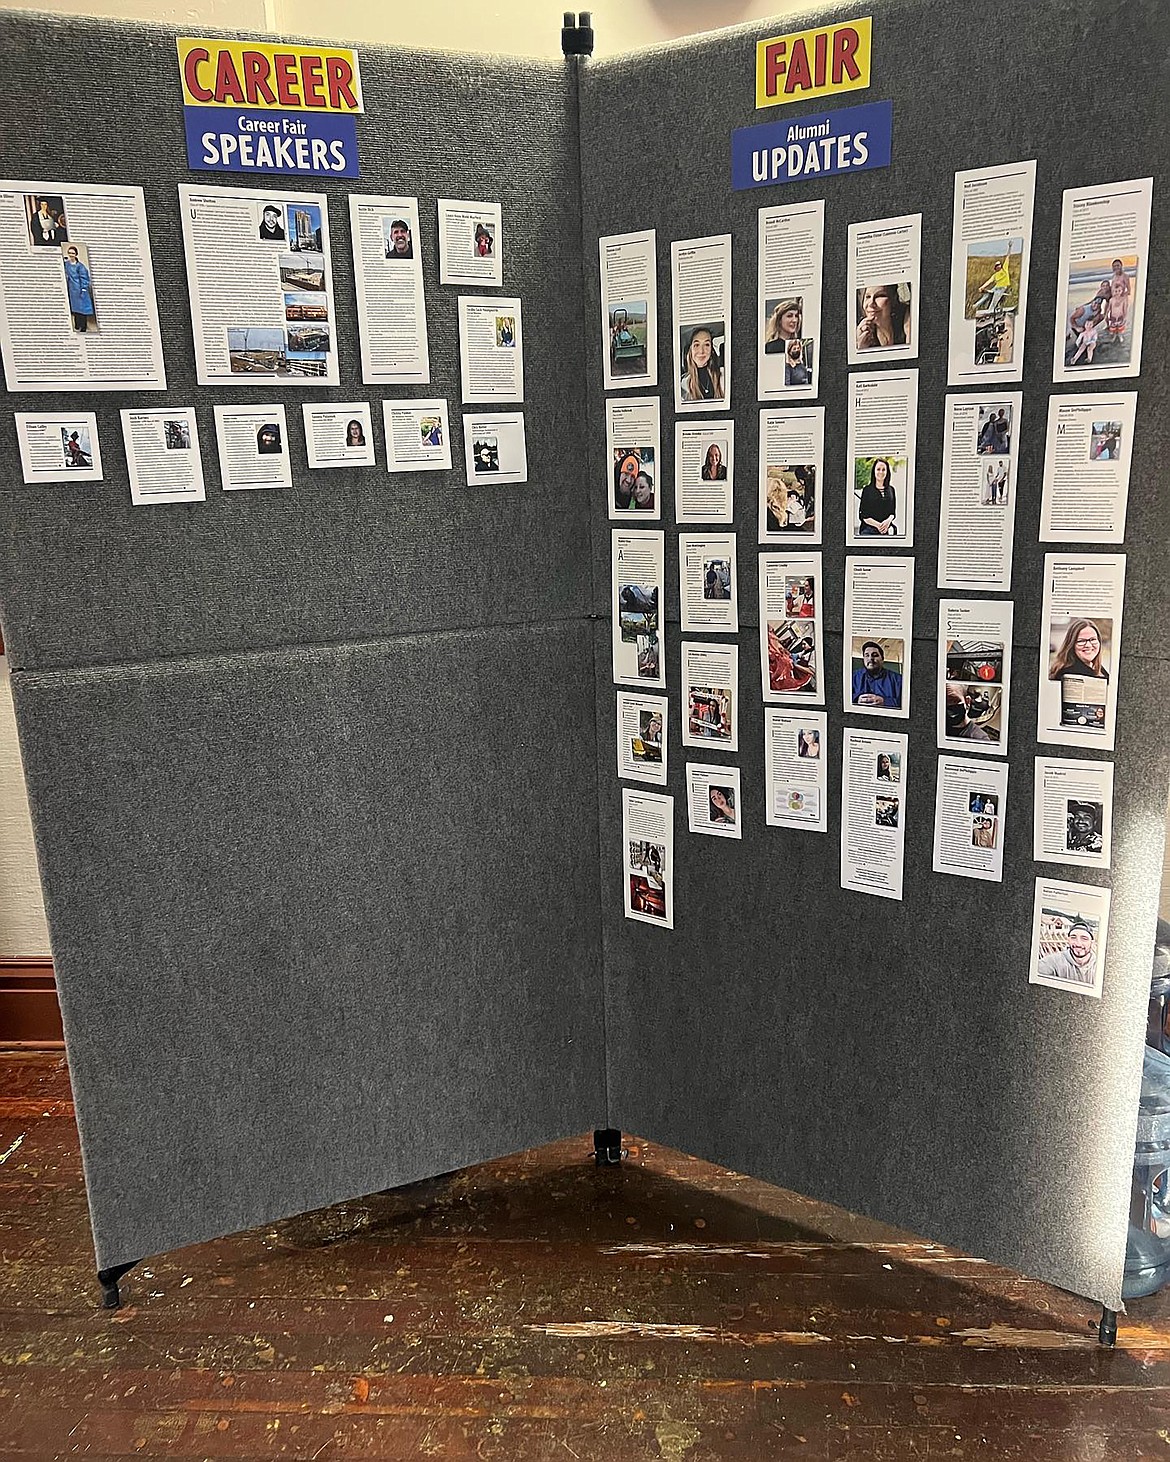 A display welcomes students to Lake Pend Oreille High School's first career fair — and show the many achievements of the school's graduates.